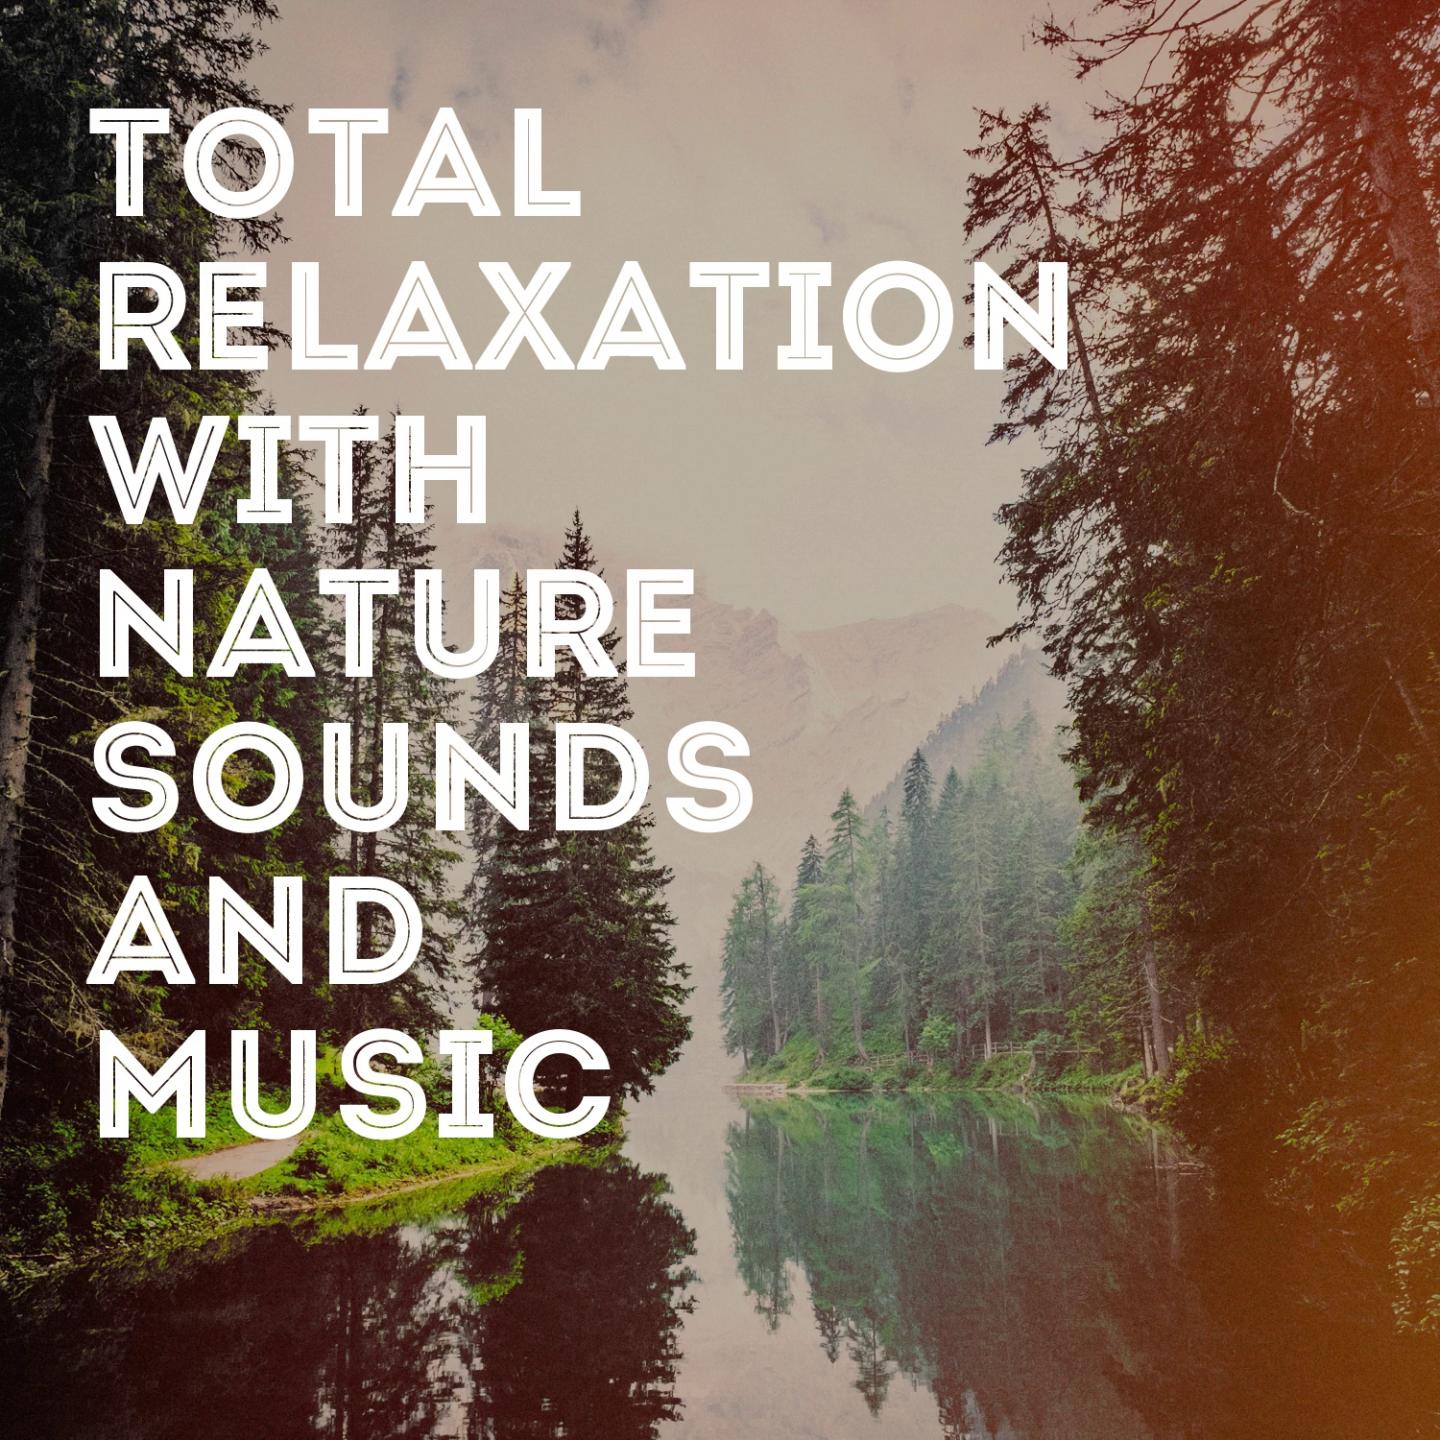 Total Relaxation with Nature Sounds and Music